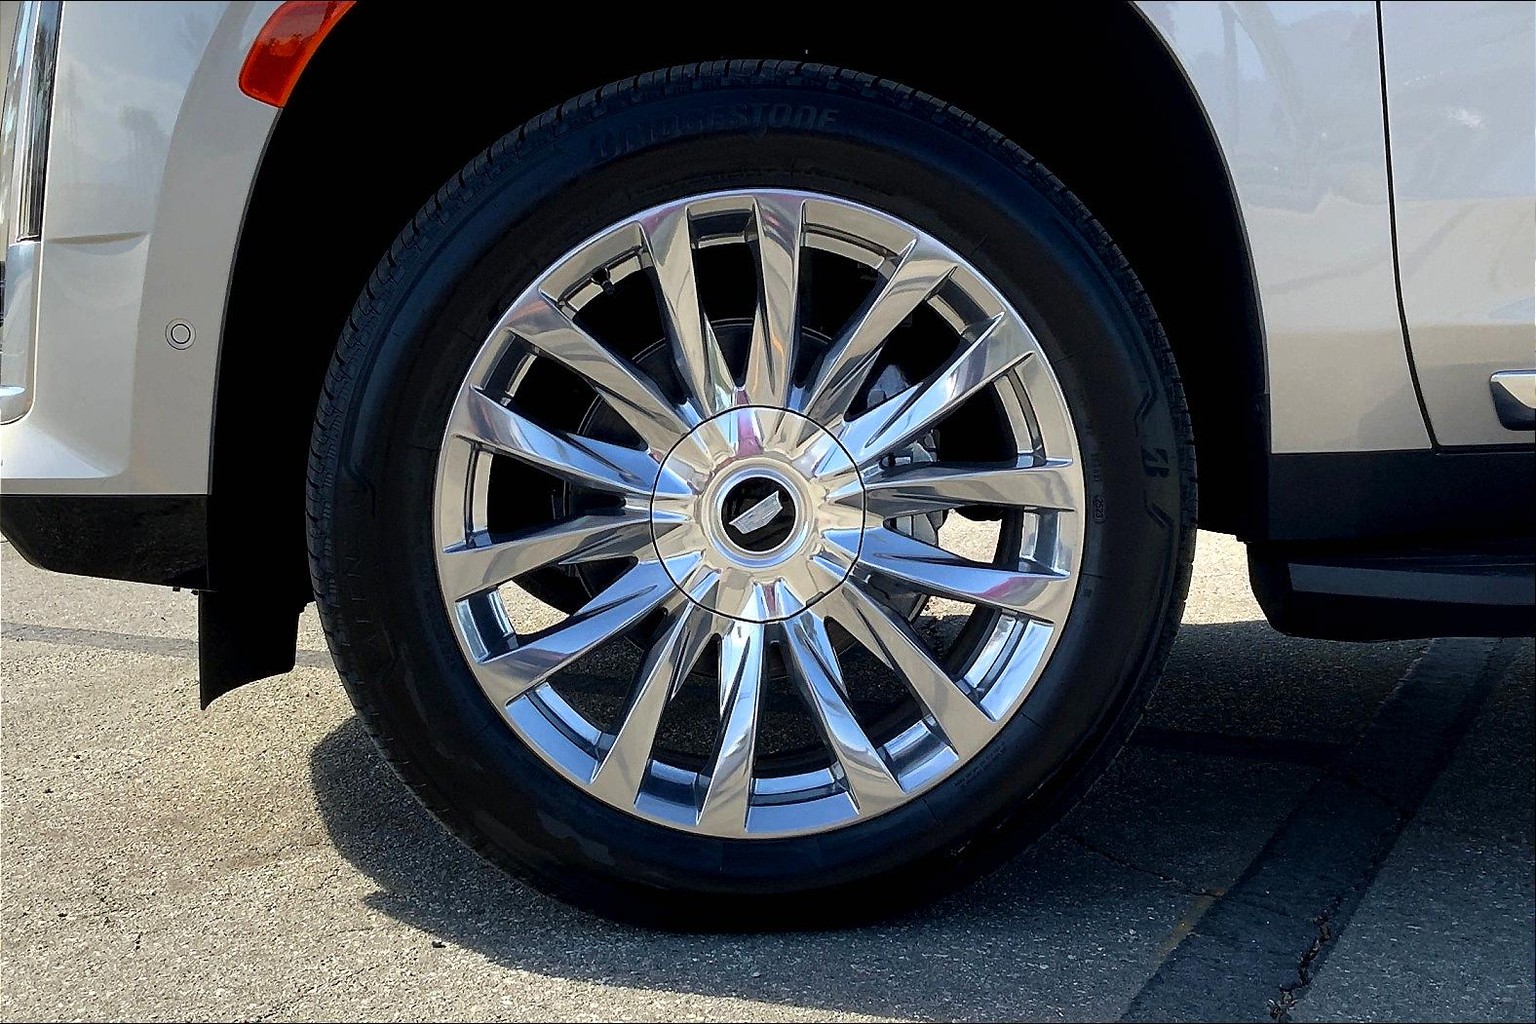 Pinnacle Clear Coat Safe Wheel Cleaner cleans tires and wheels